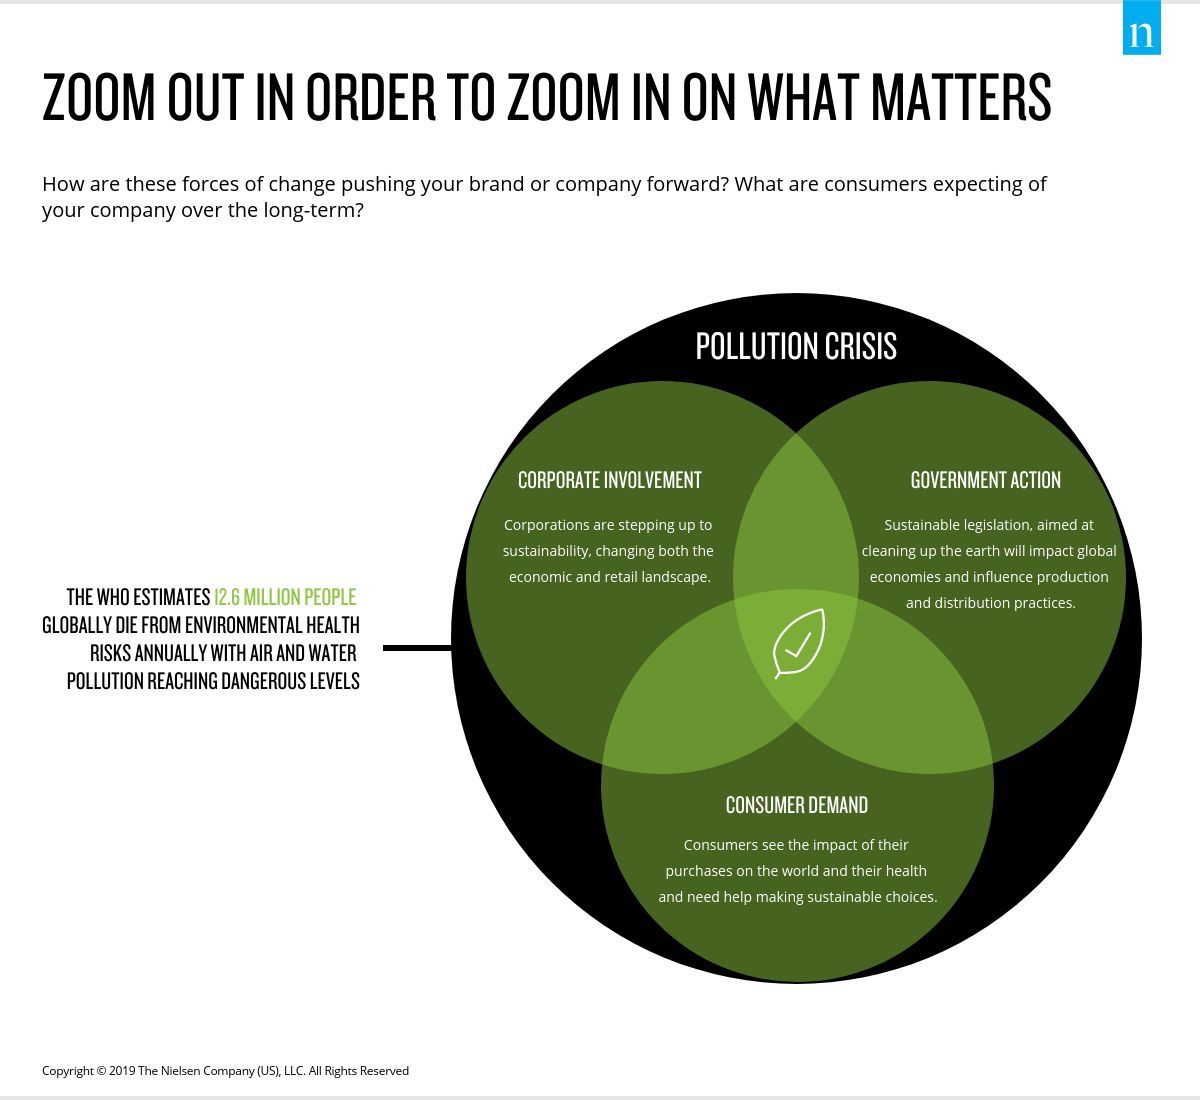 Zoom out in order to zoom in on what matters